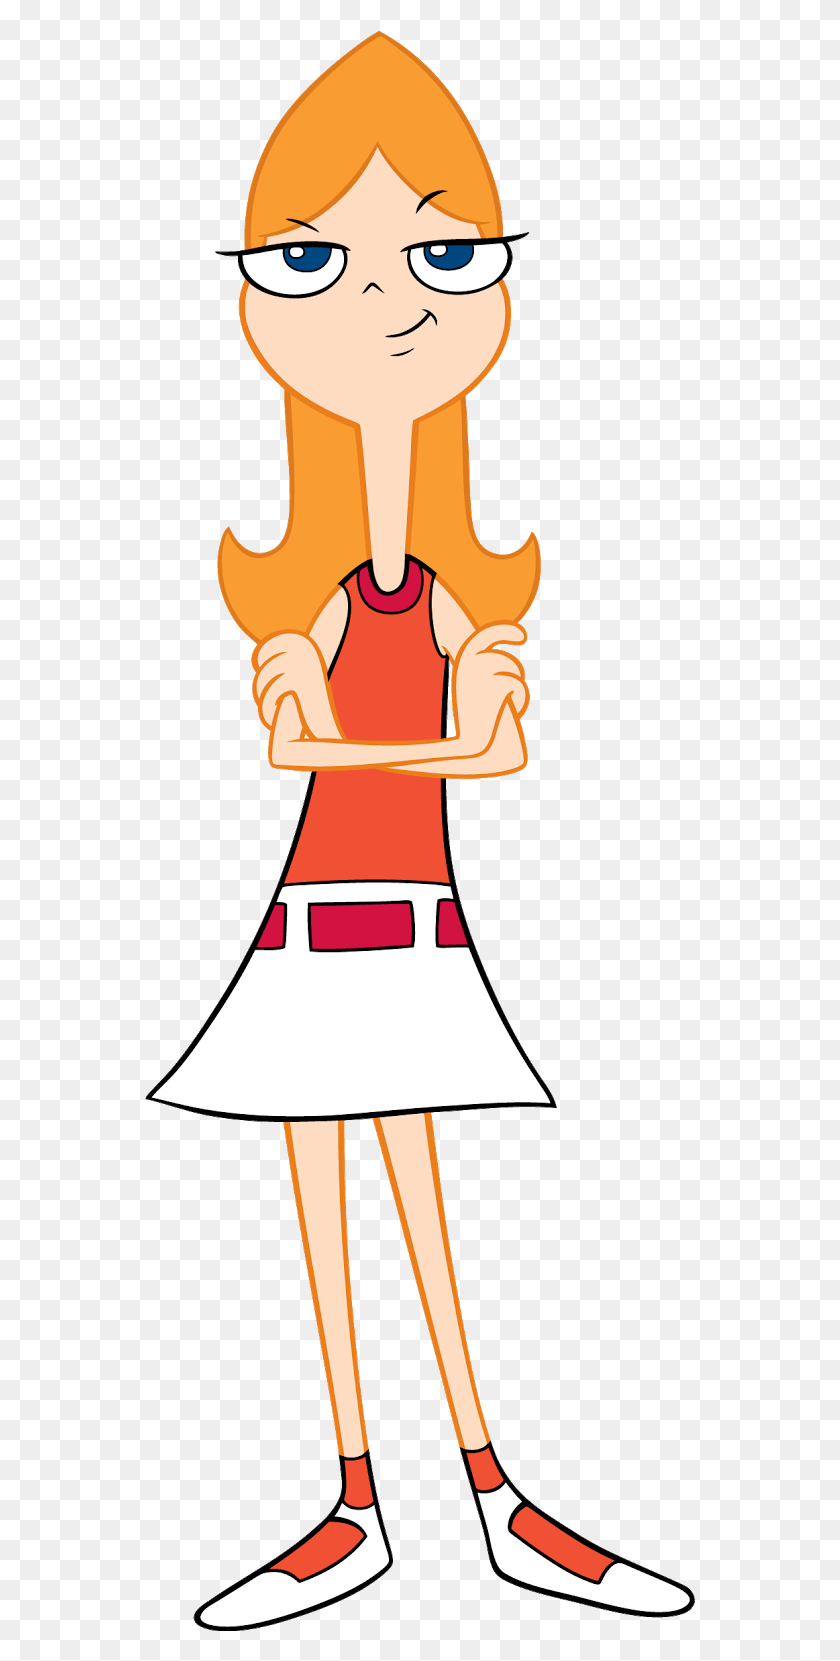 551x1601 Phineas Y Ferb Candace Flynn, Mano, Aire Libre, Naturaleza Hd Png